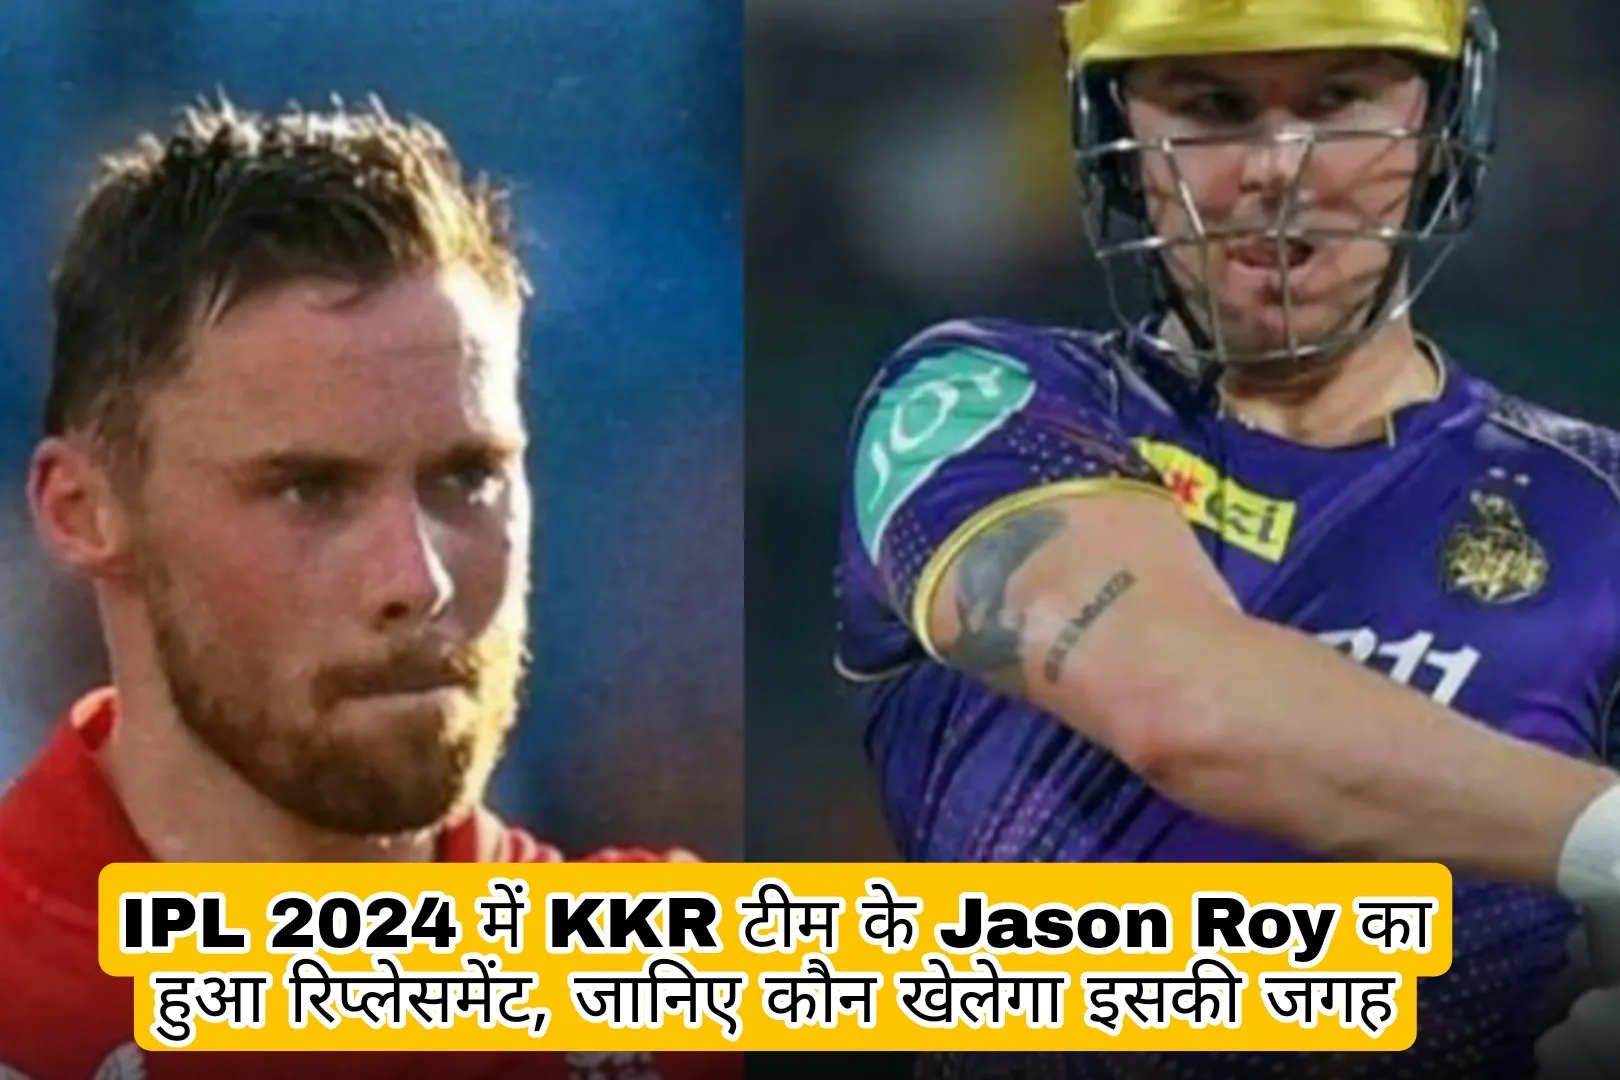 IPL 2024 New Replacement Players